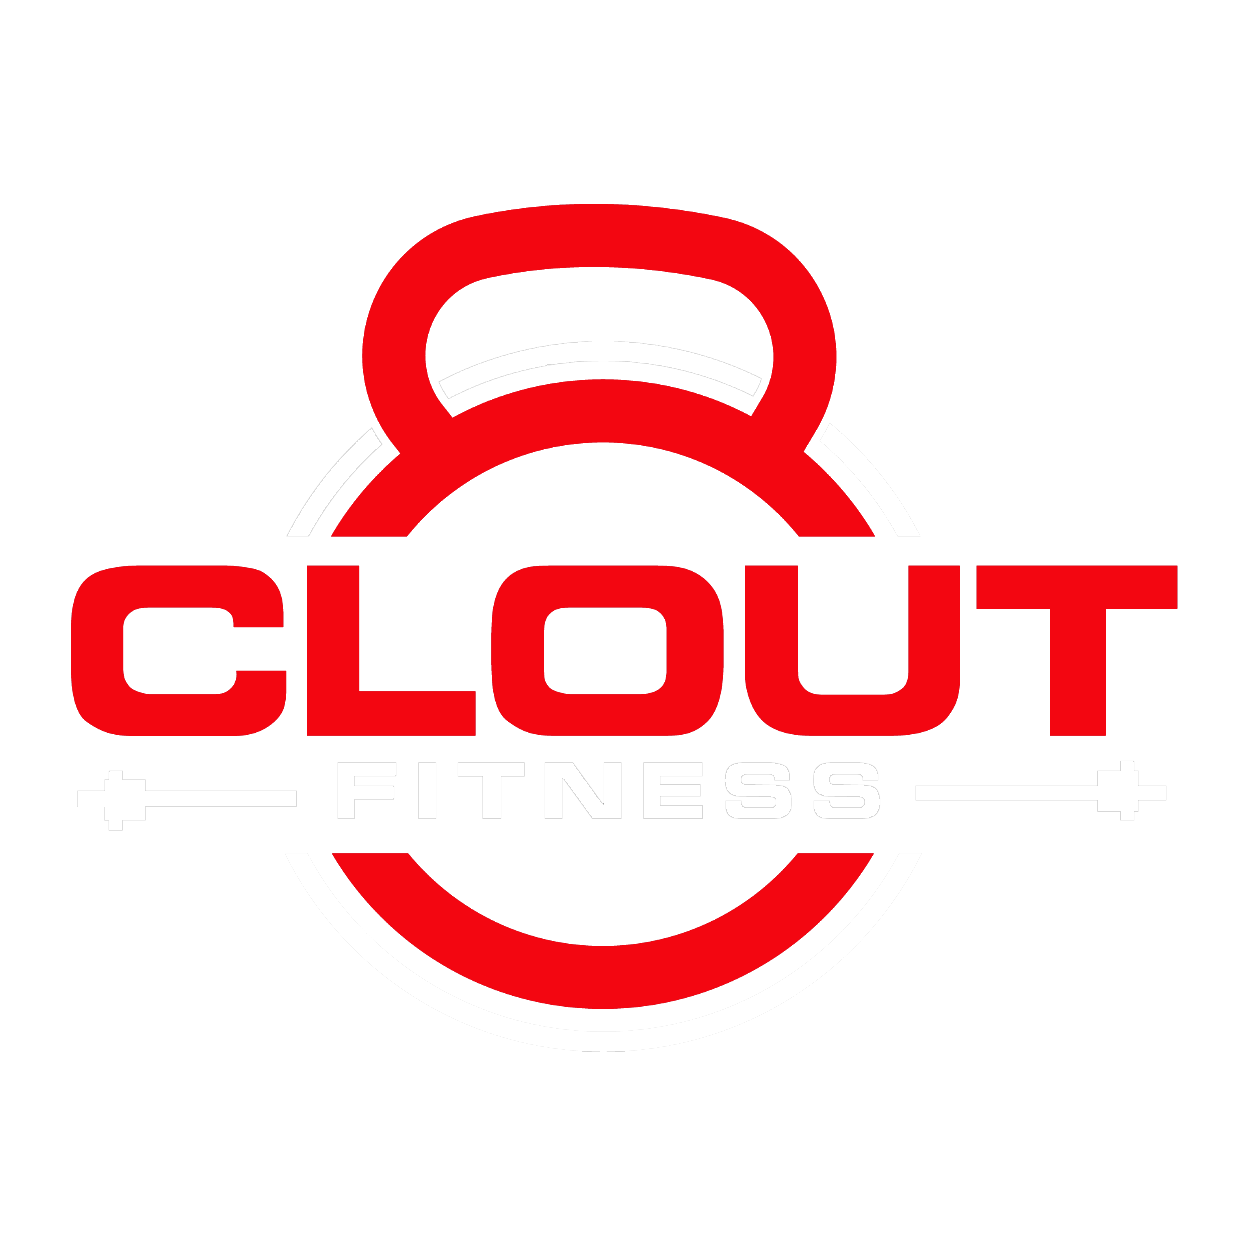 Clout Fitness